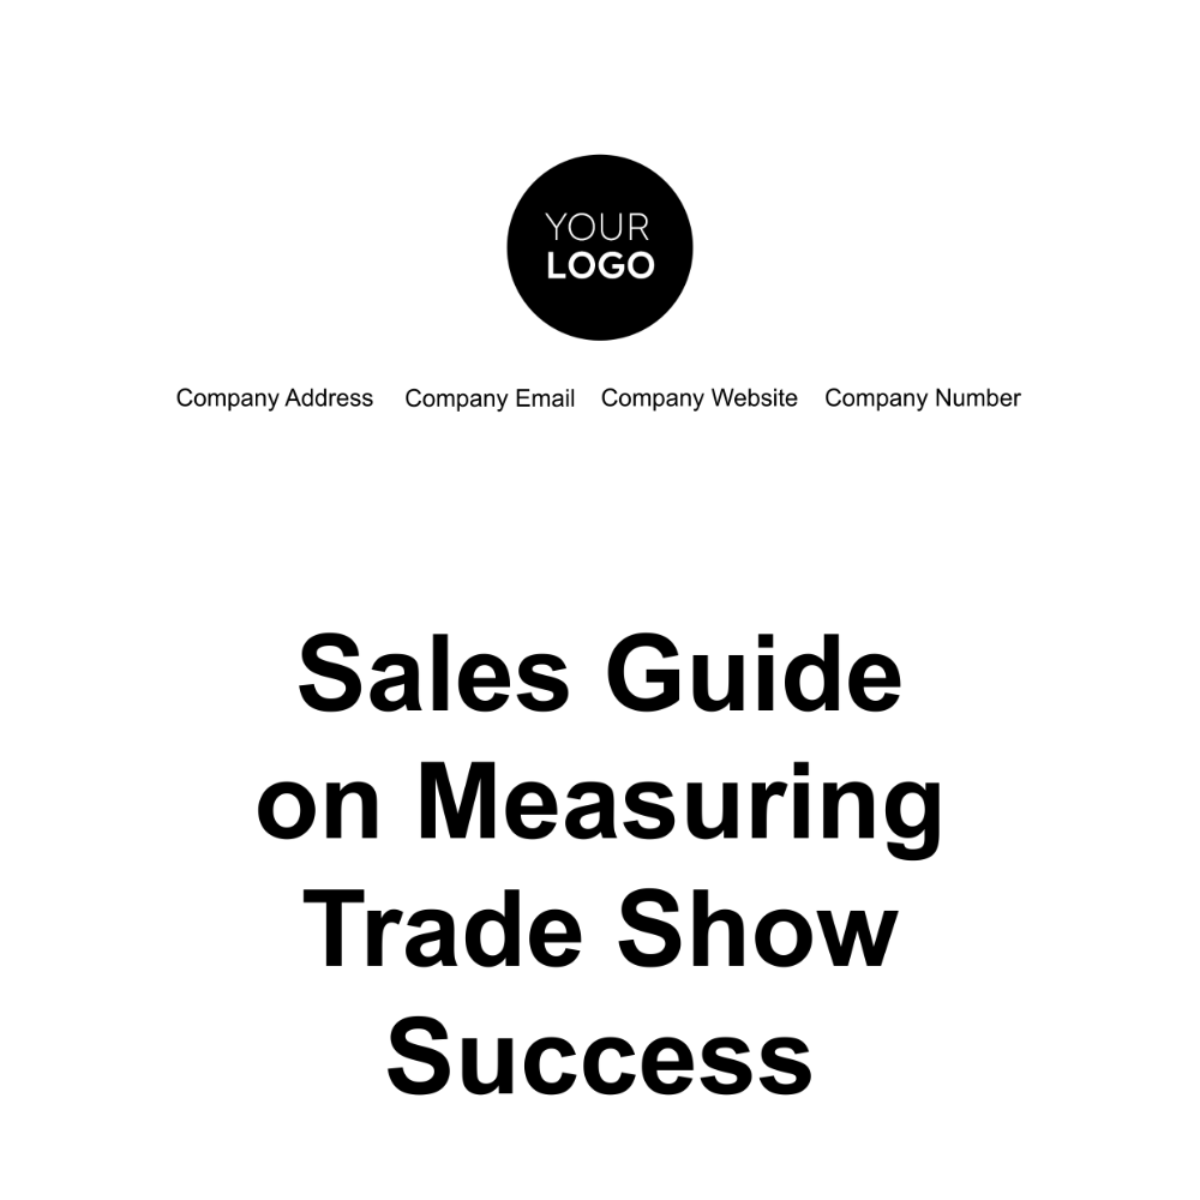 Sales Guide on Measuring Trade Show Success Template